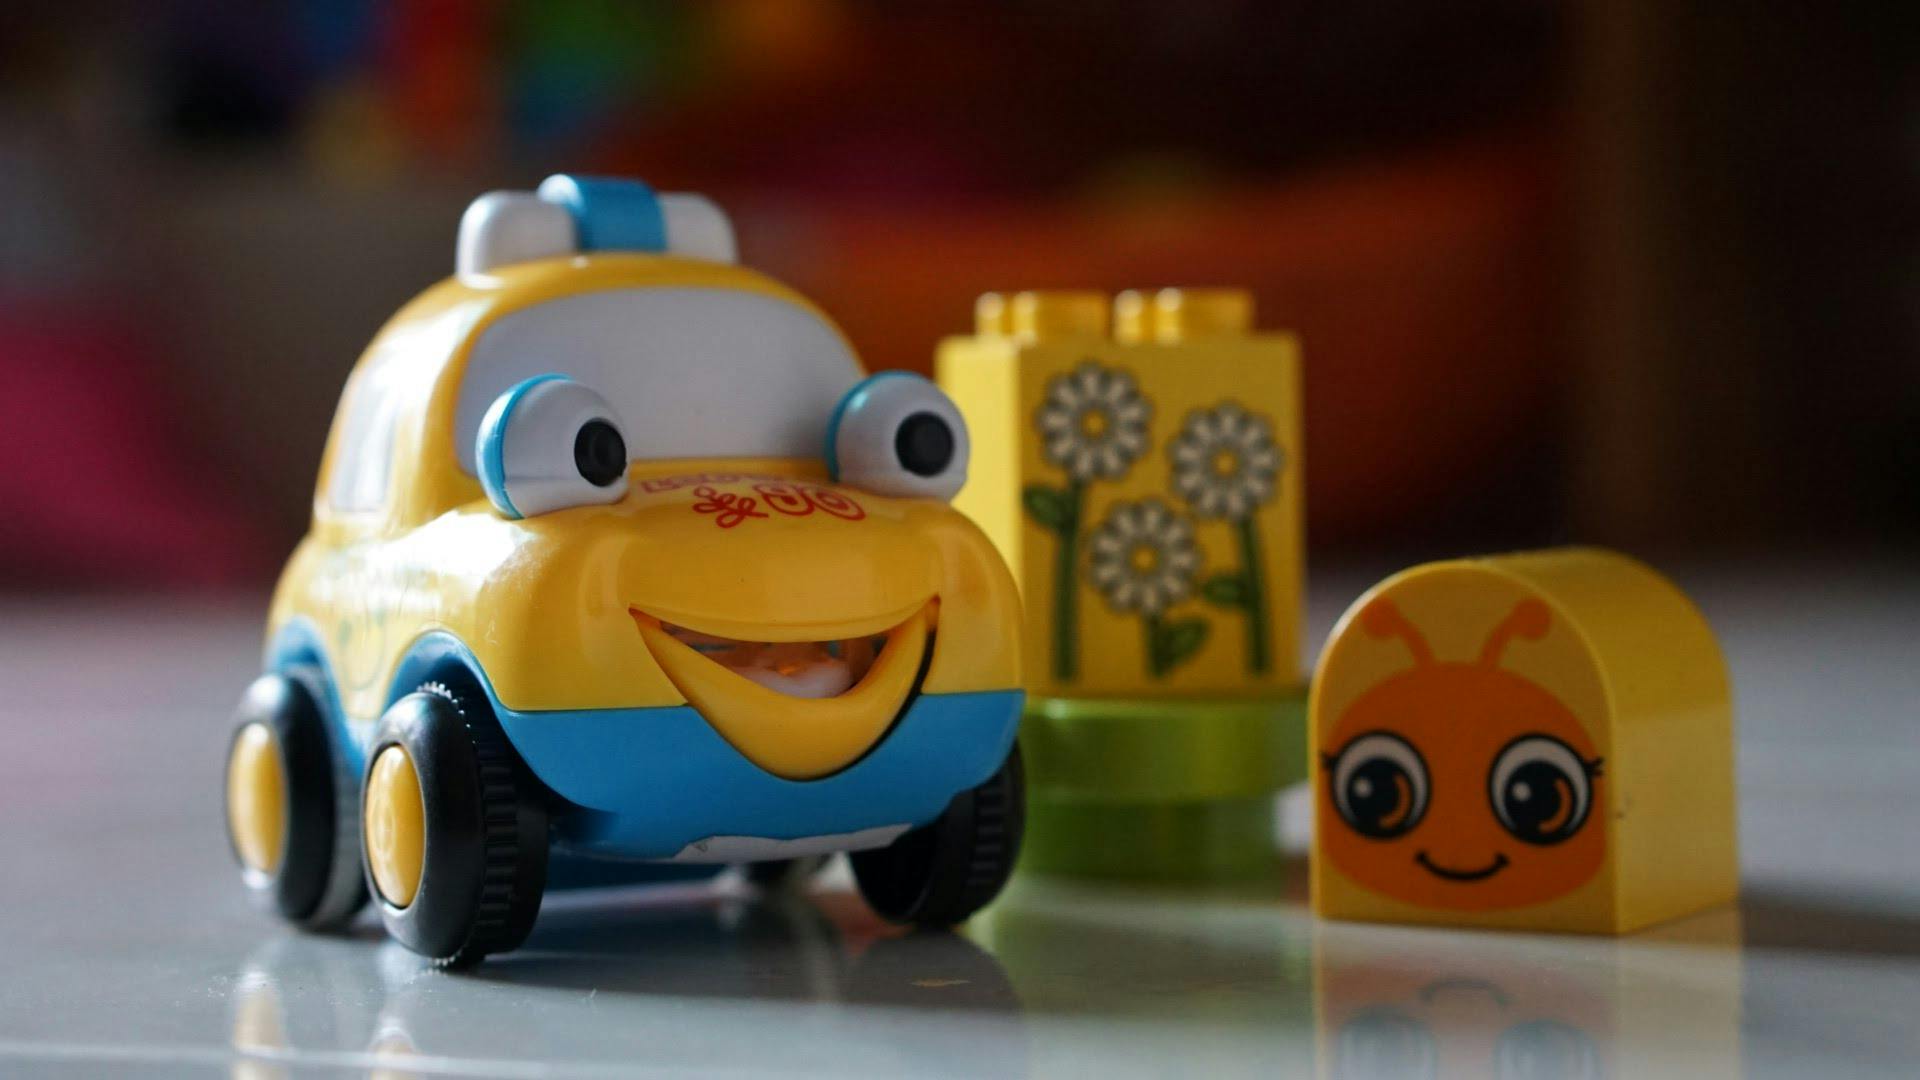 Free stock photo of baby toy, kids toy, toy cars